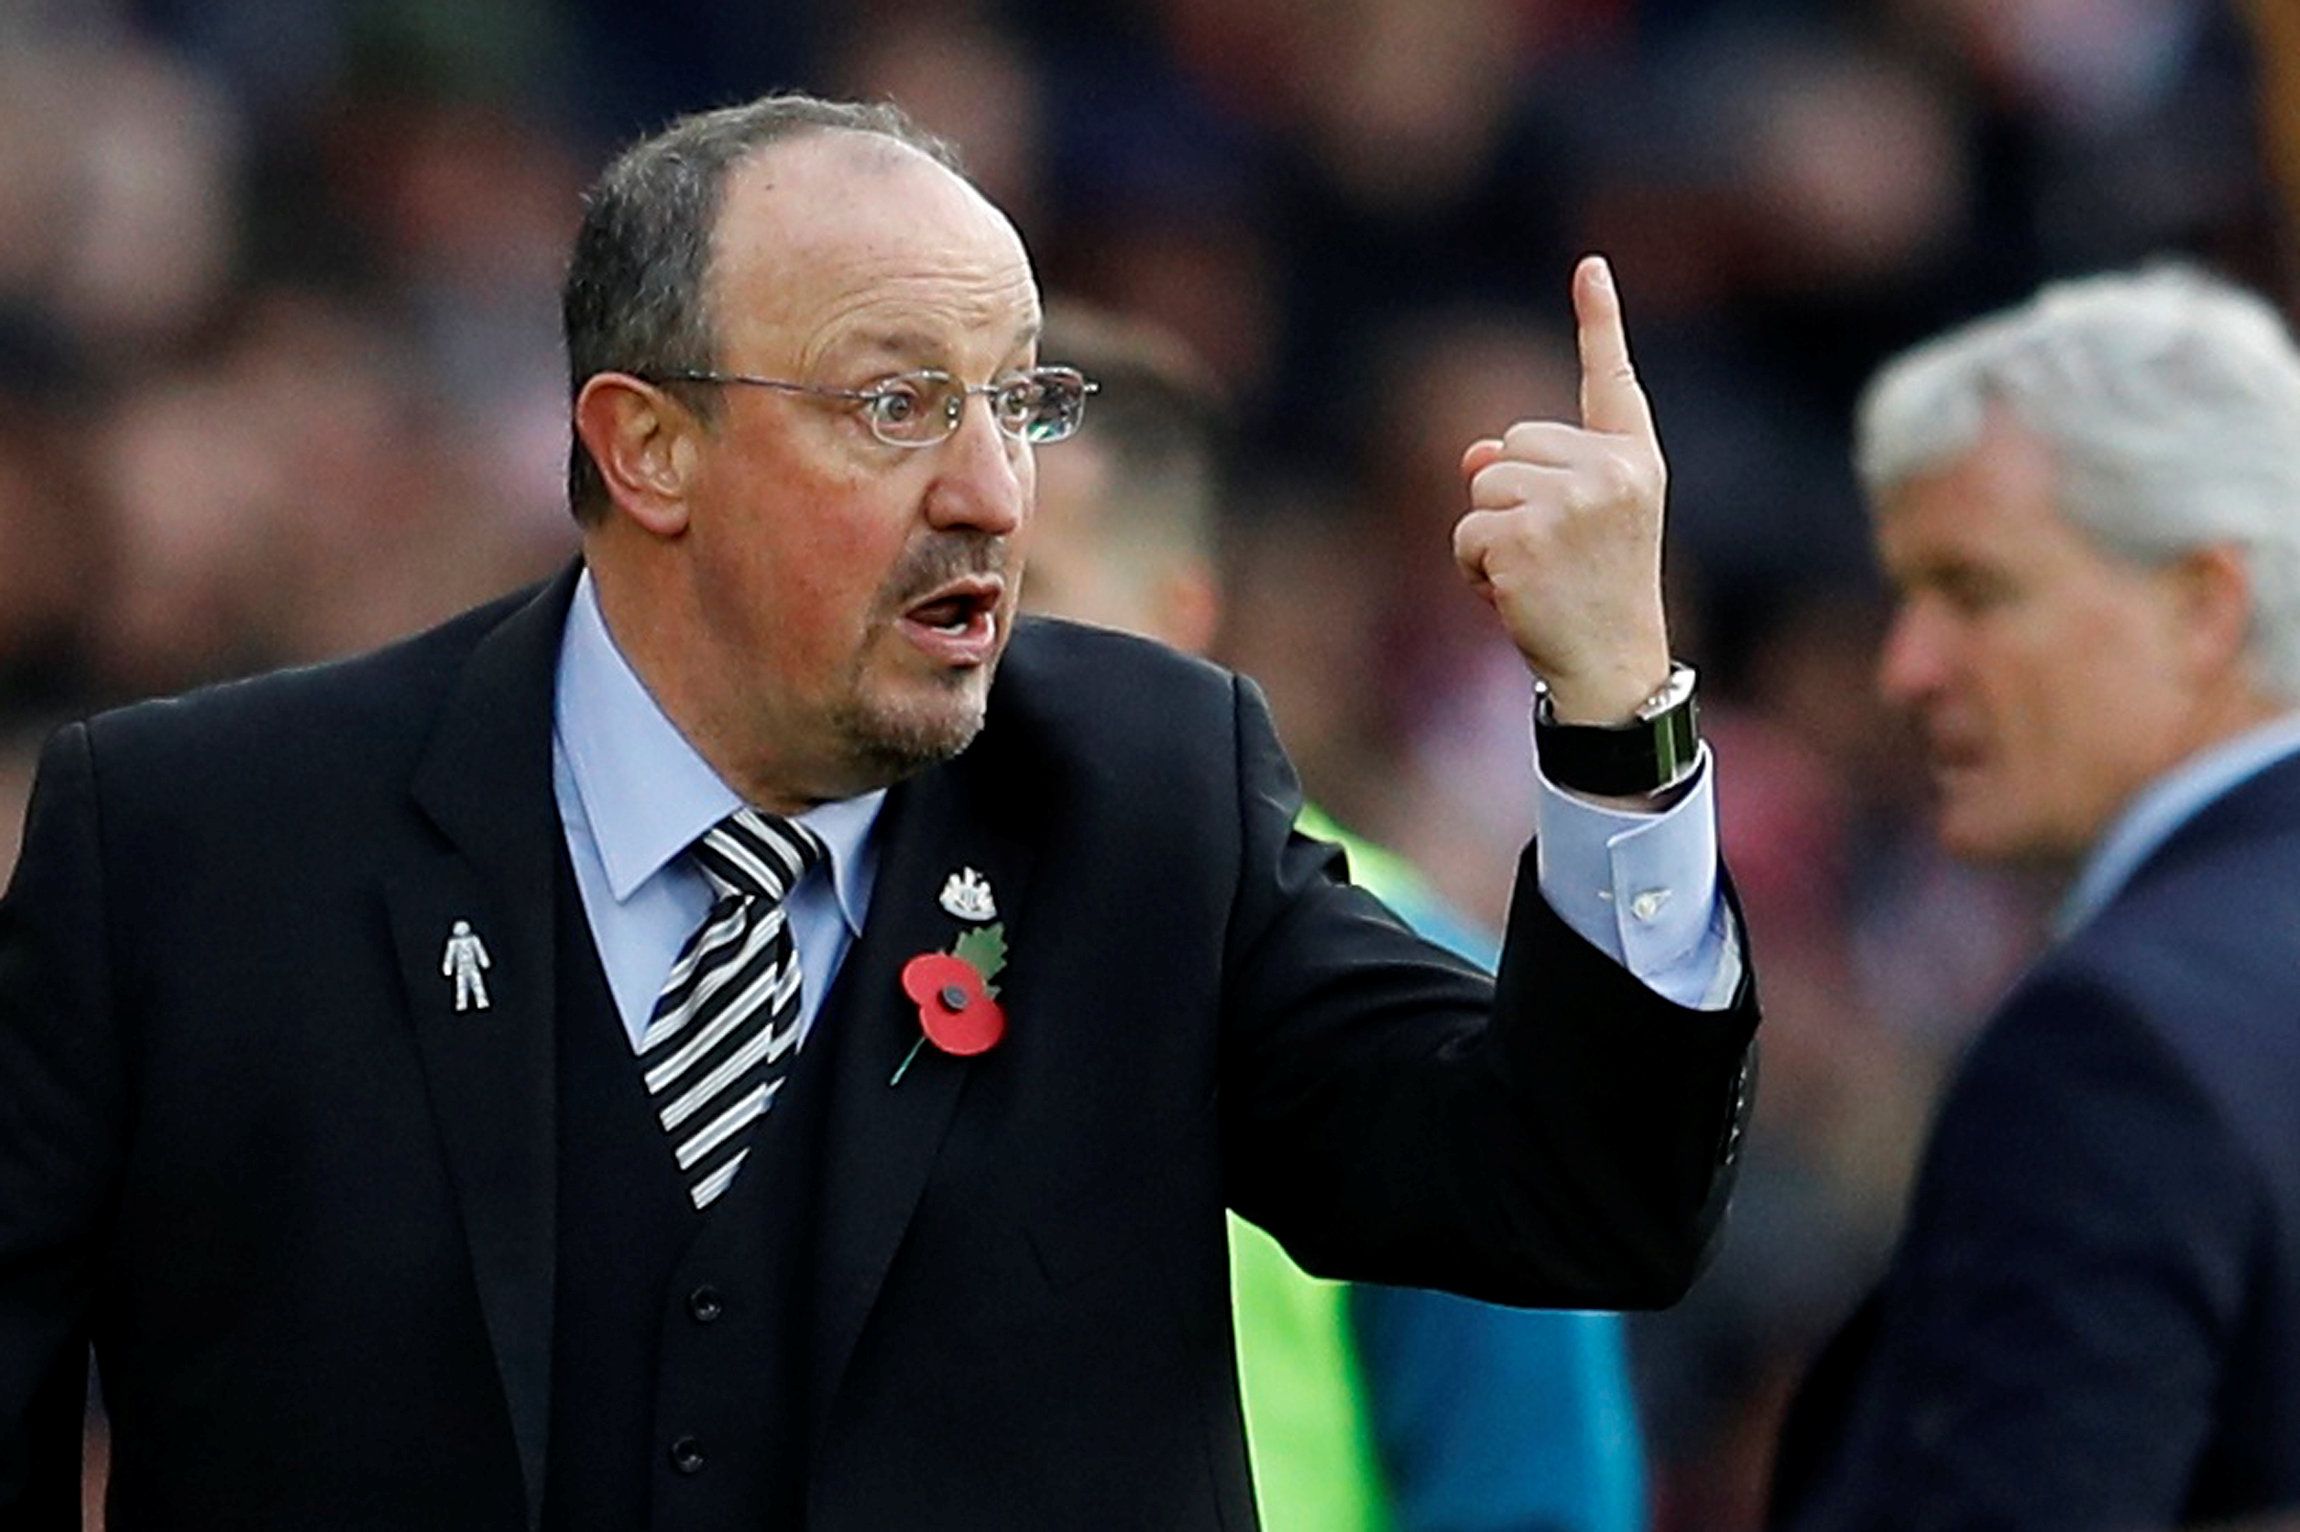 Soccer Football - Premier League - Southampton v Newcastle United - St Mary's Stadium, Southampton, Britain - October 27, 2018  Newcastle United manager Rafael Benitez reacts during the match           REUTERS/Peter Nicholls  EDITORIAL USE ONLY. No use with unauthorized audio, video, data, fixture lists, club/league logos or "live" services. Online in-match use limited to 75 images, no video emulation. No use in betting, games or single club/league/player publications.  Please contact your accou